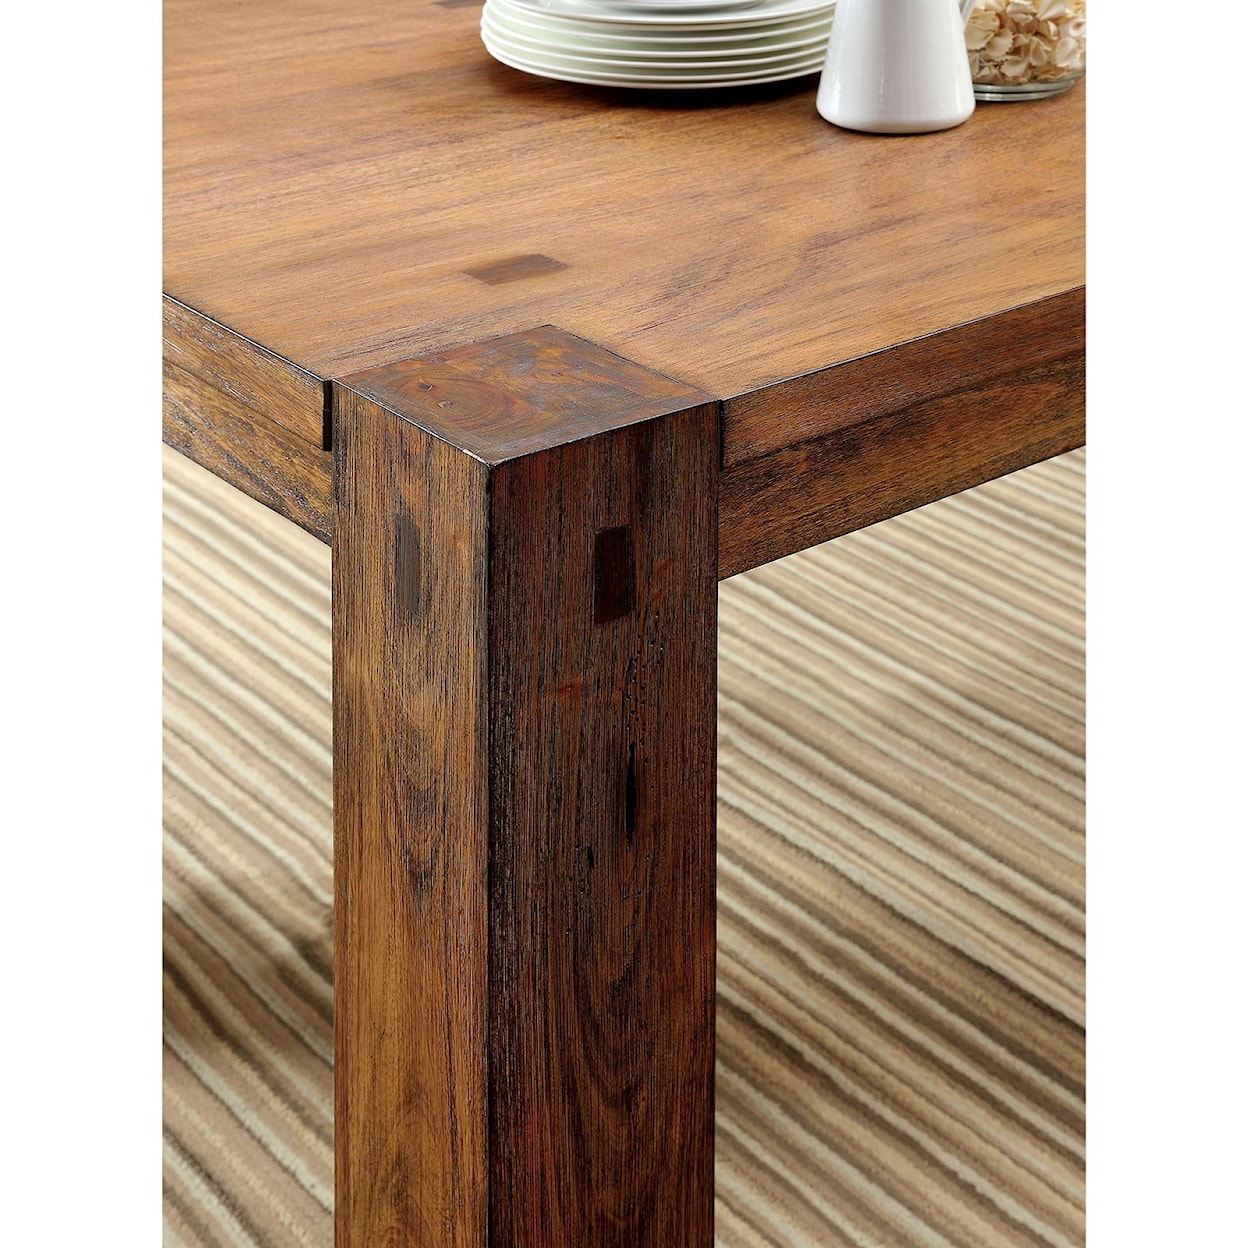 Furniture of America - FOA Frontier Dining Table